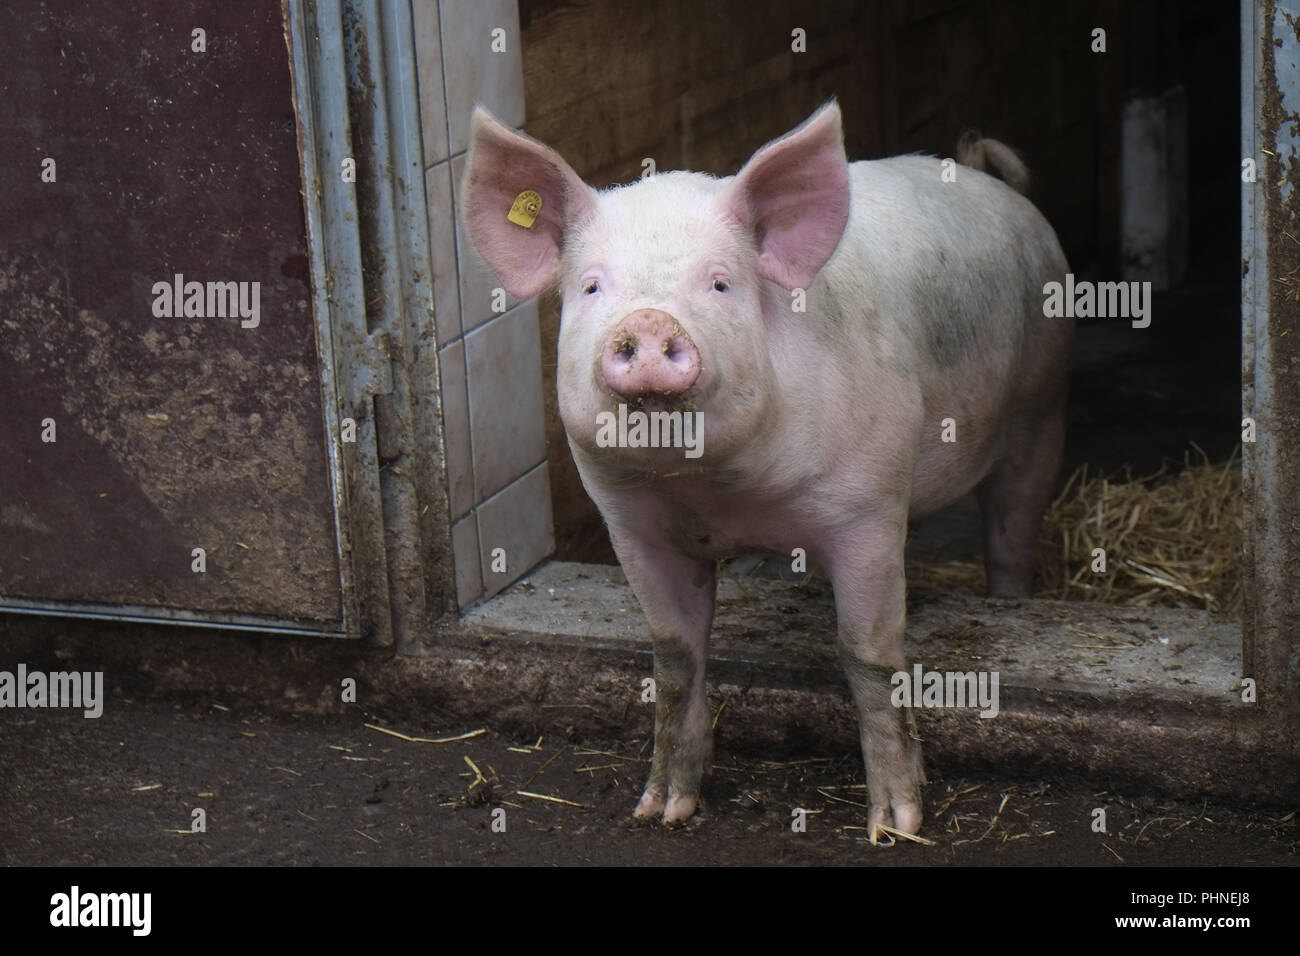 Domestic pig at the the stable door Stock Photo